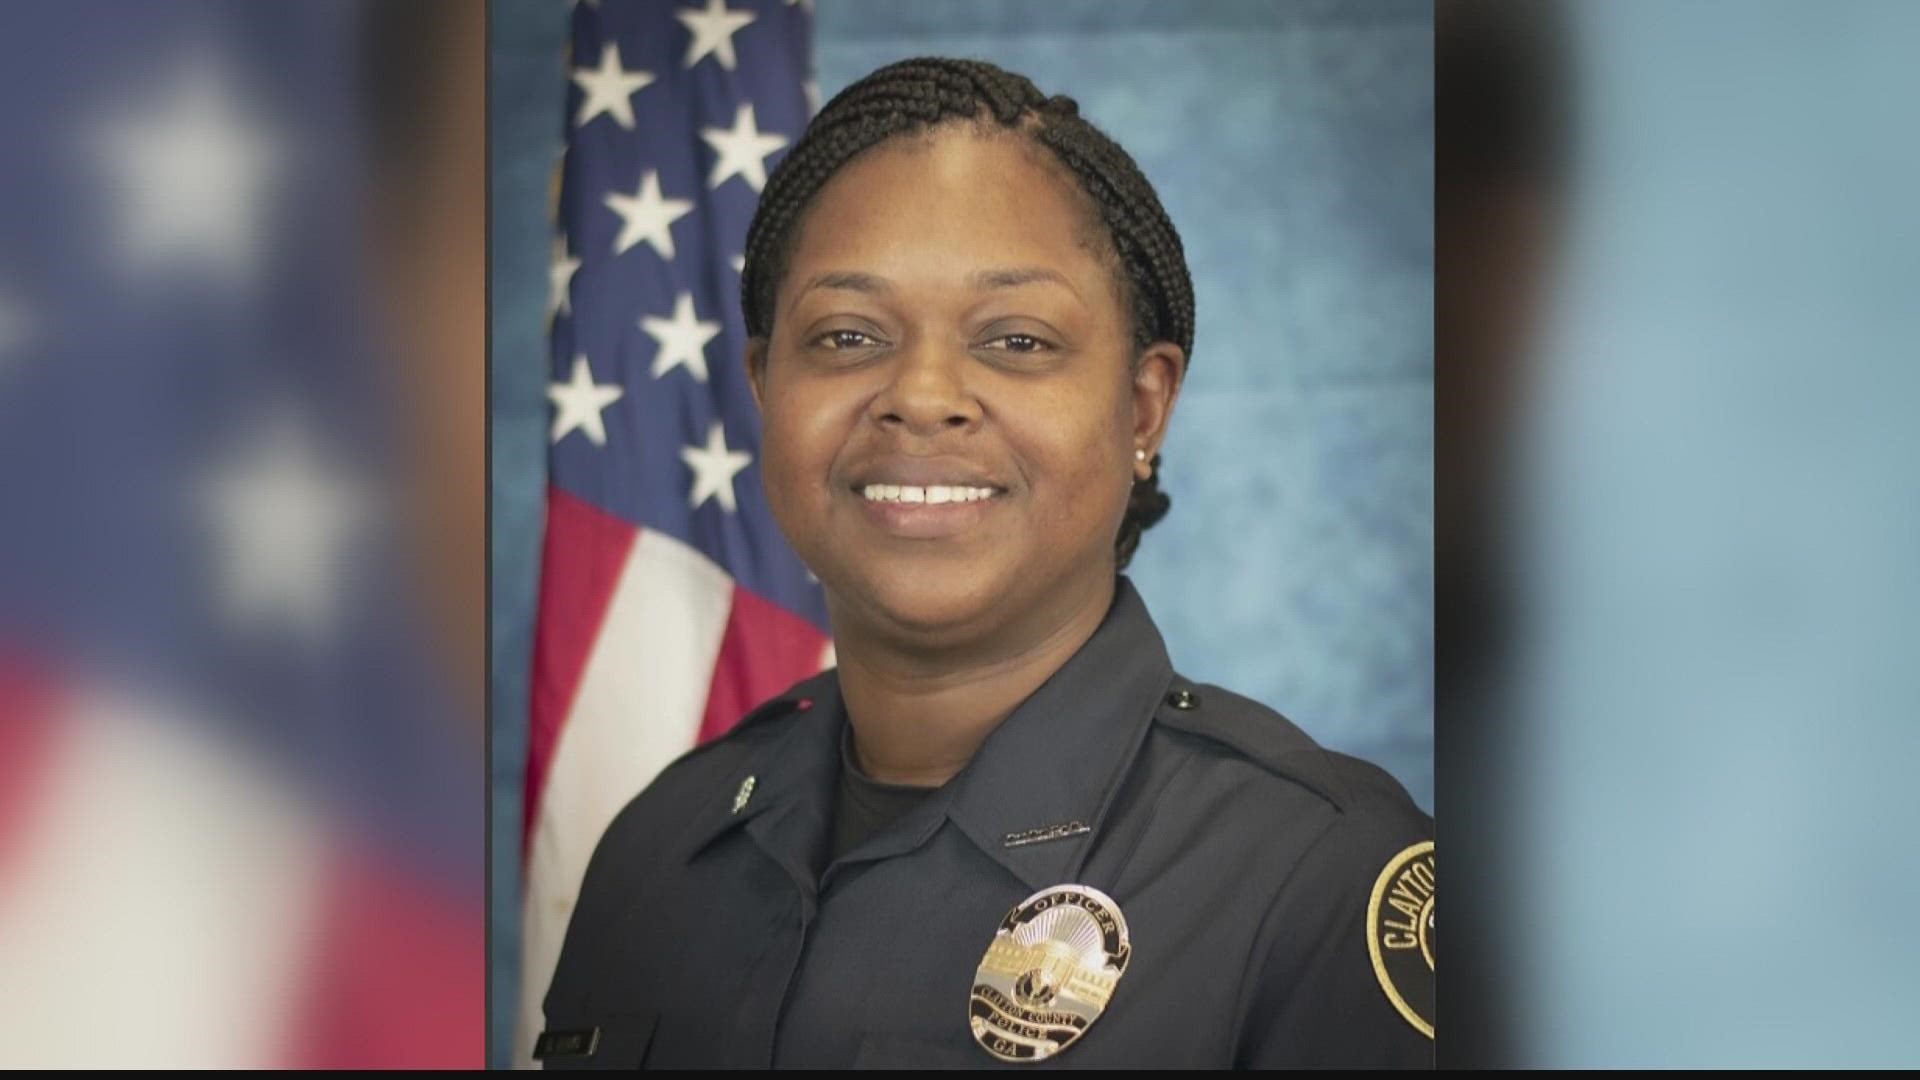 The Clayton County officer was shot at by a woman who later drove to Atlanta and allegedly fired at officers there before being shot herself.